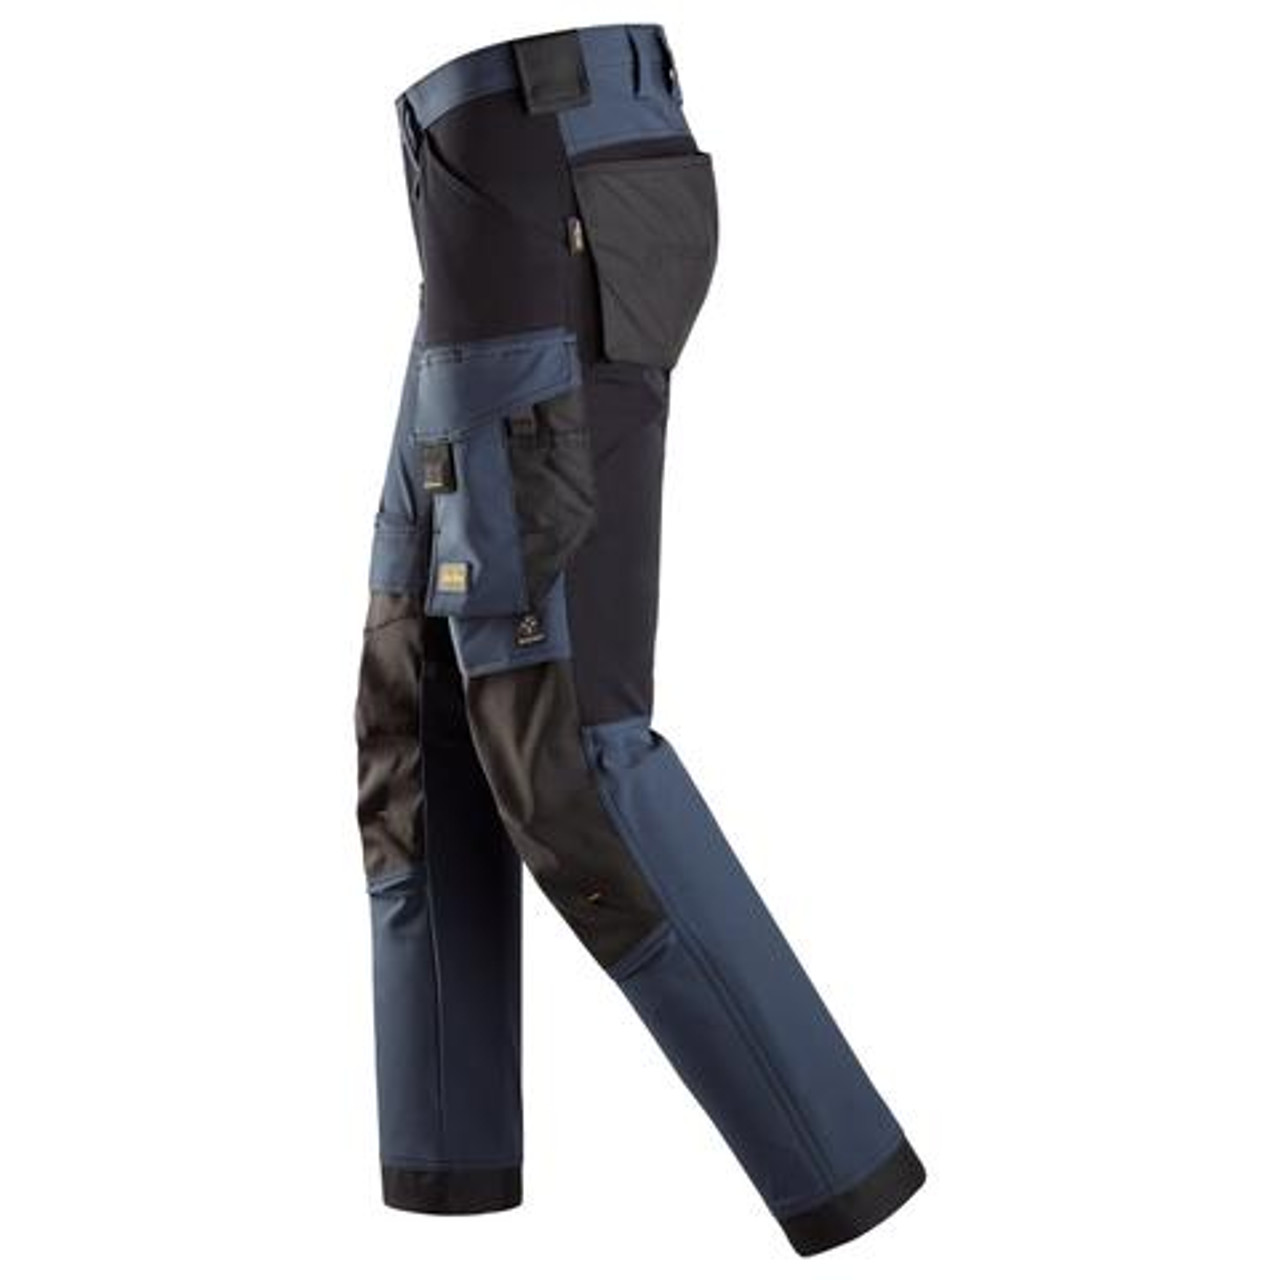 Buy online in New Zealand and Australia SNICKERS 4-Way Stretch Navy Blue Trousers for Cabinet Makers that have Kneepad Pockets